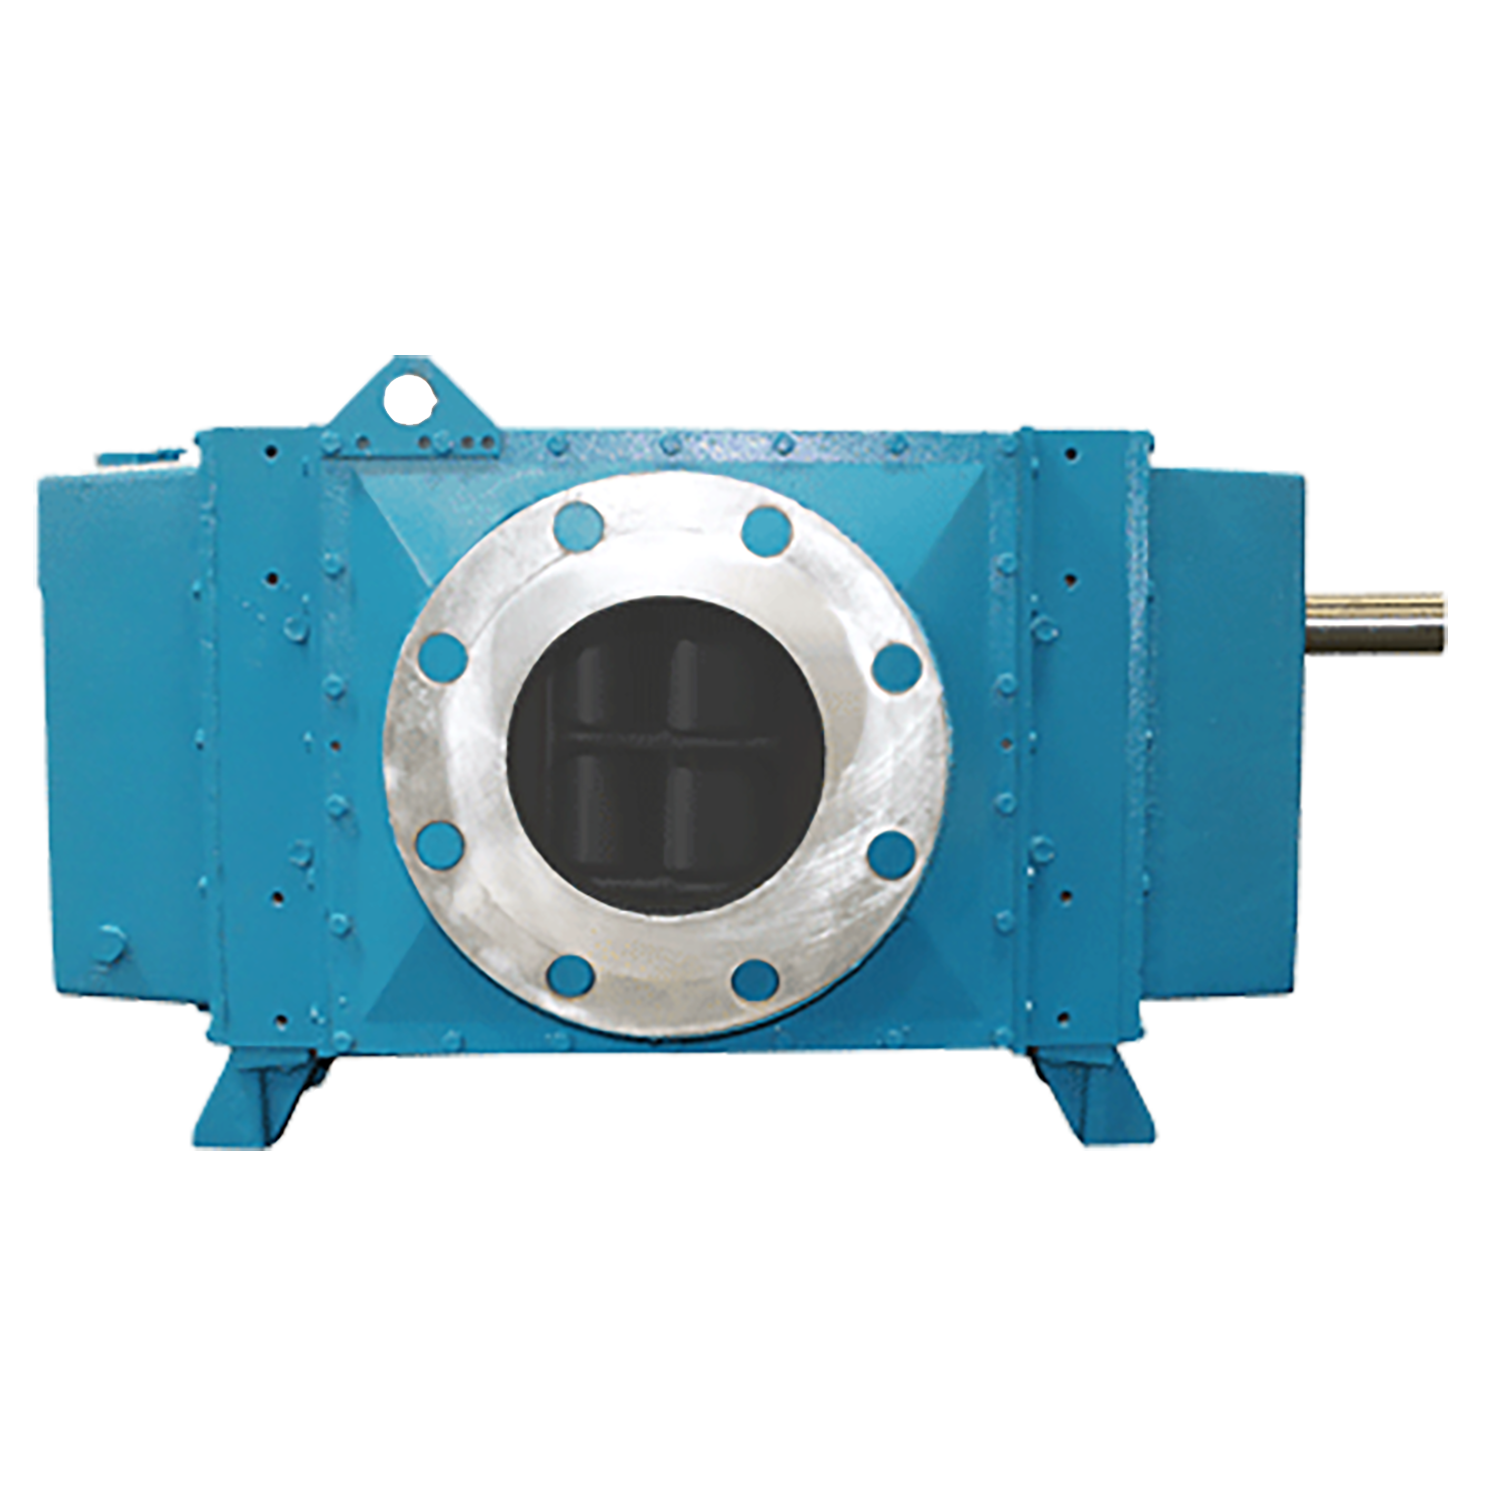 MD-Pneumatics - PD Plus 900 Series Rotary Positive Displacement Blowers